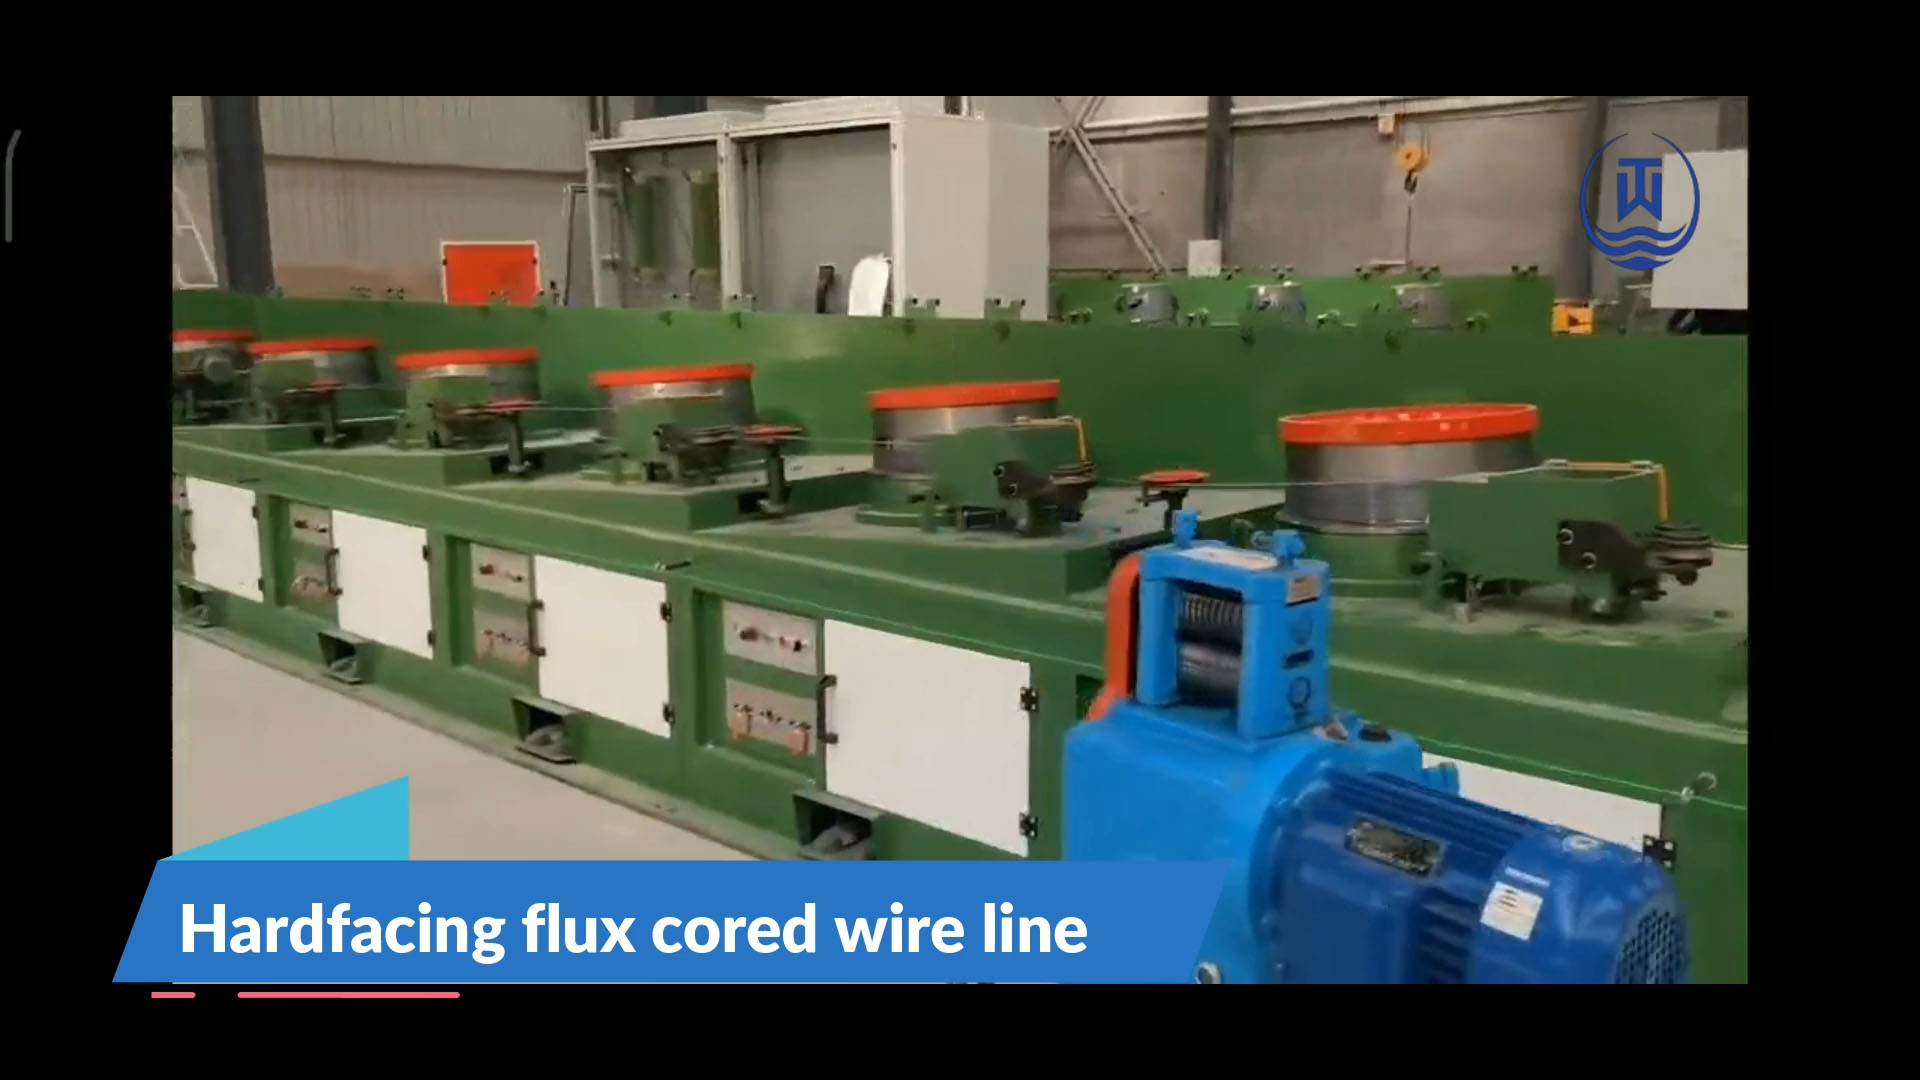 Hardfacing flux cored wire line using steel strip thickness of 0.3mm or 0.4mm